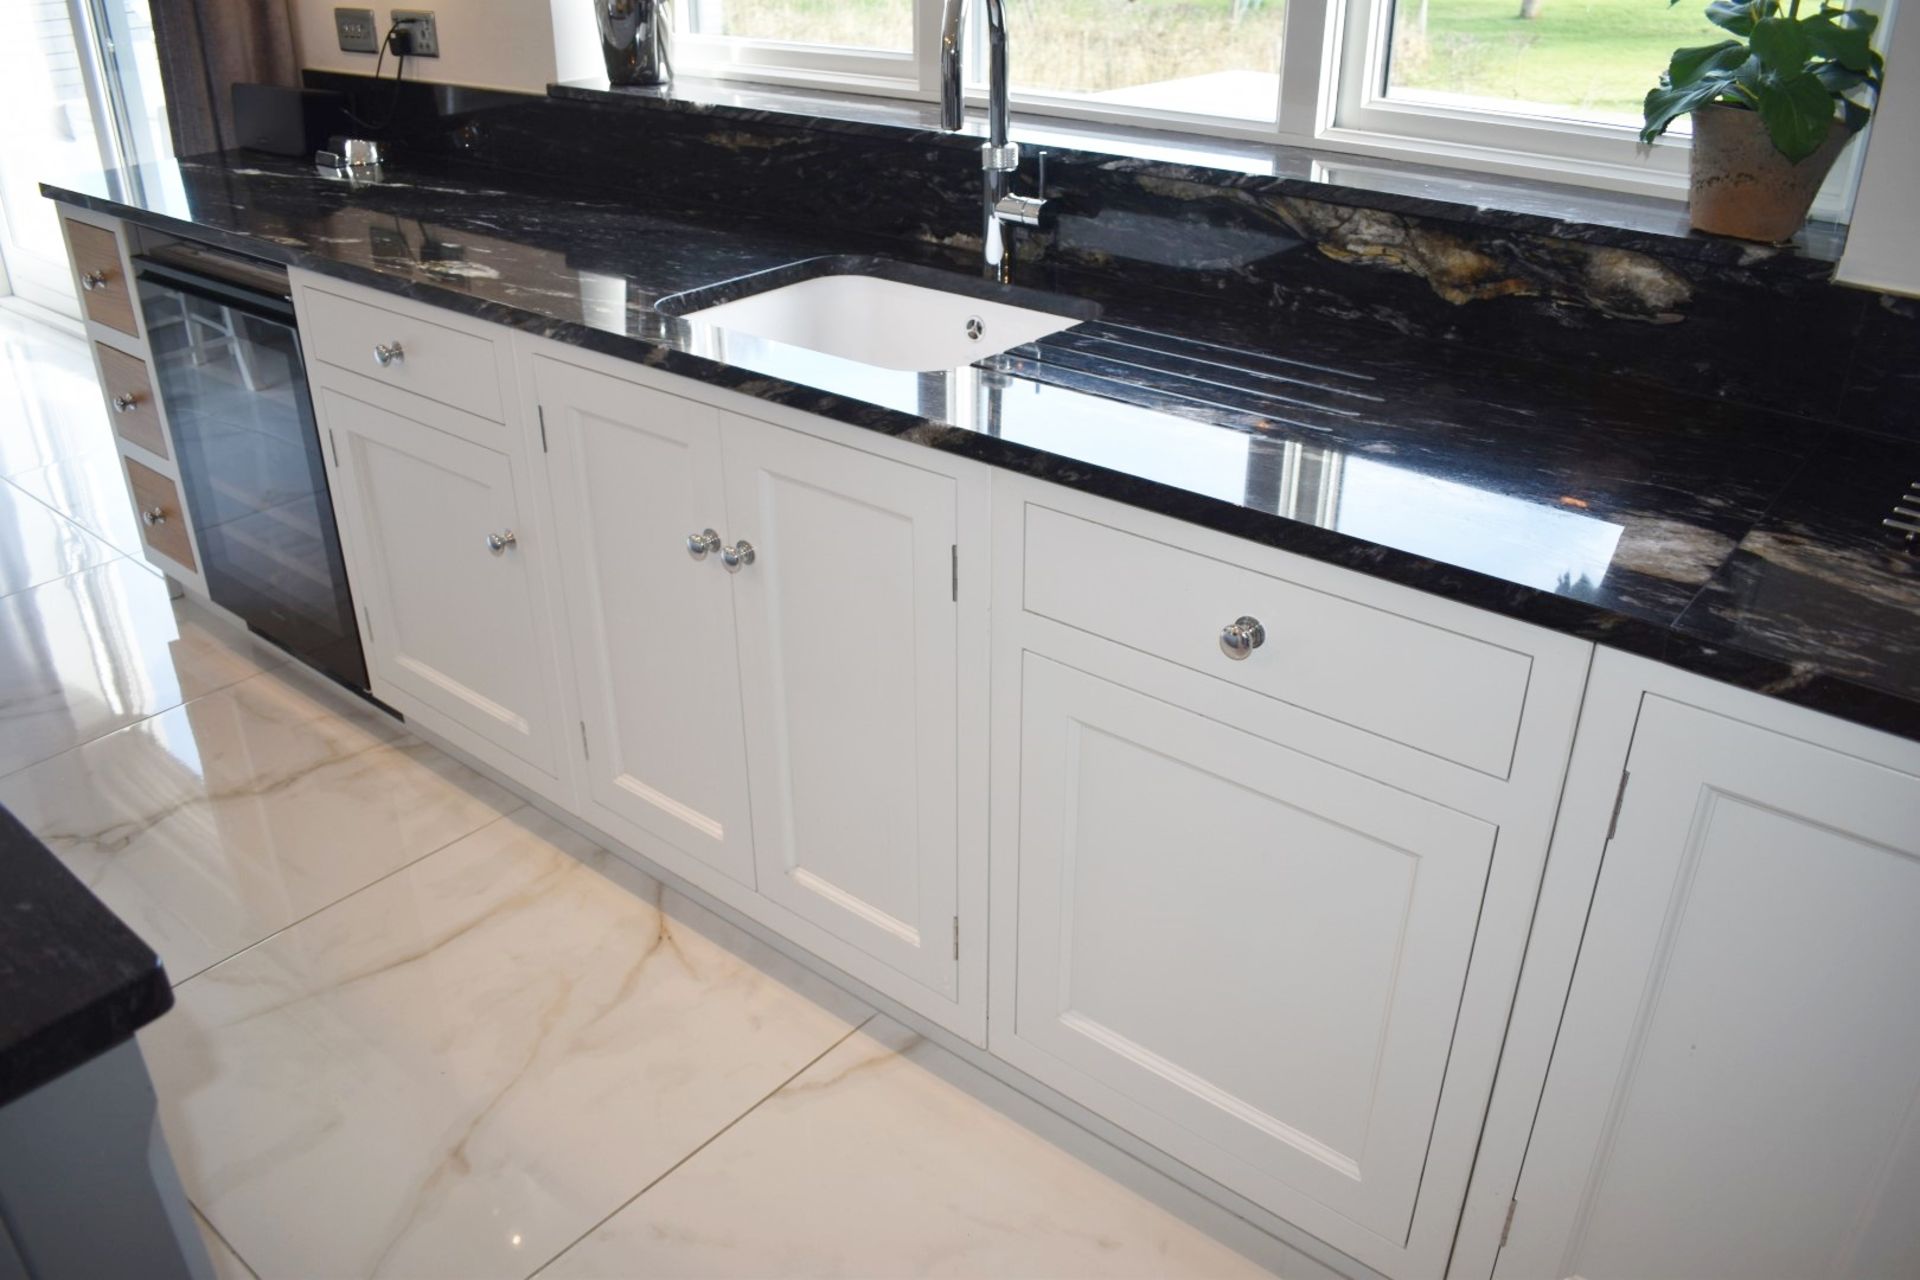 1 x Bespoke Handmade Framed Fitted Kitchen By Matthew Marsden Furniture - Features Hand Painted - Image 19 of 97